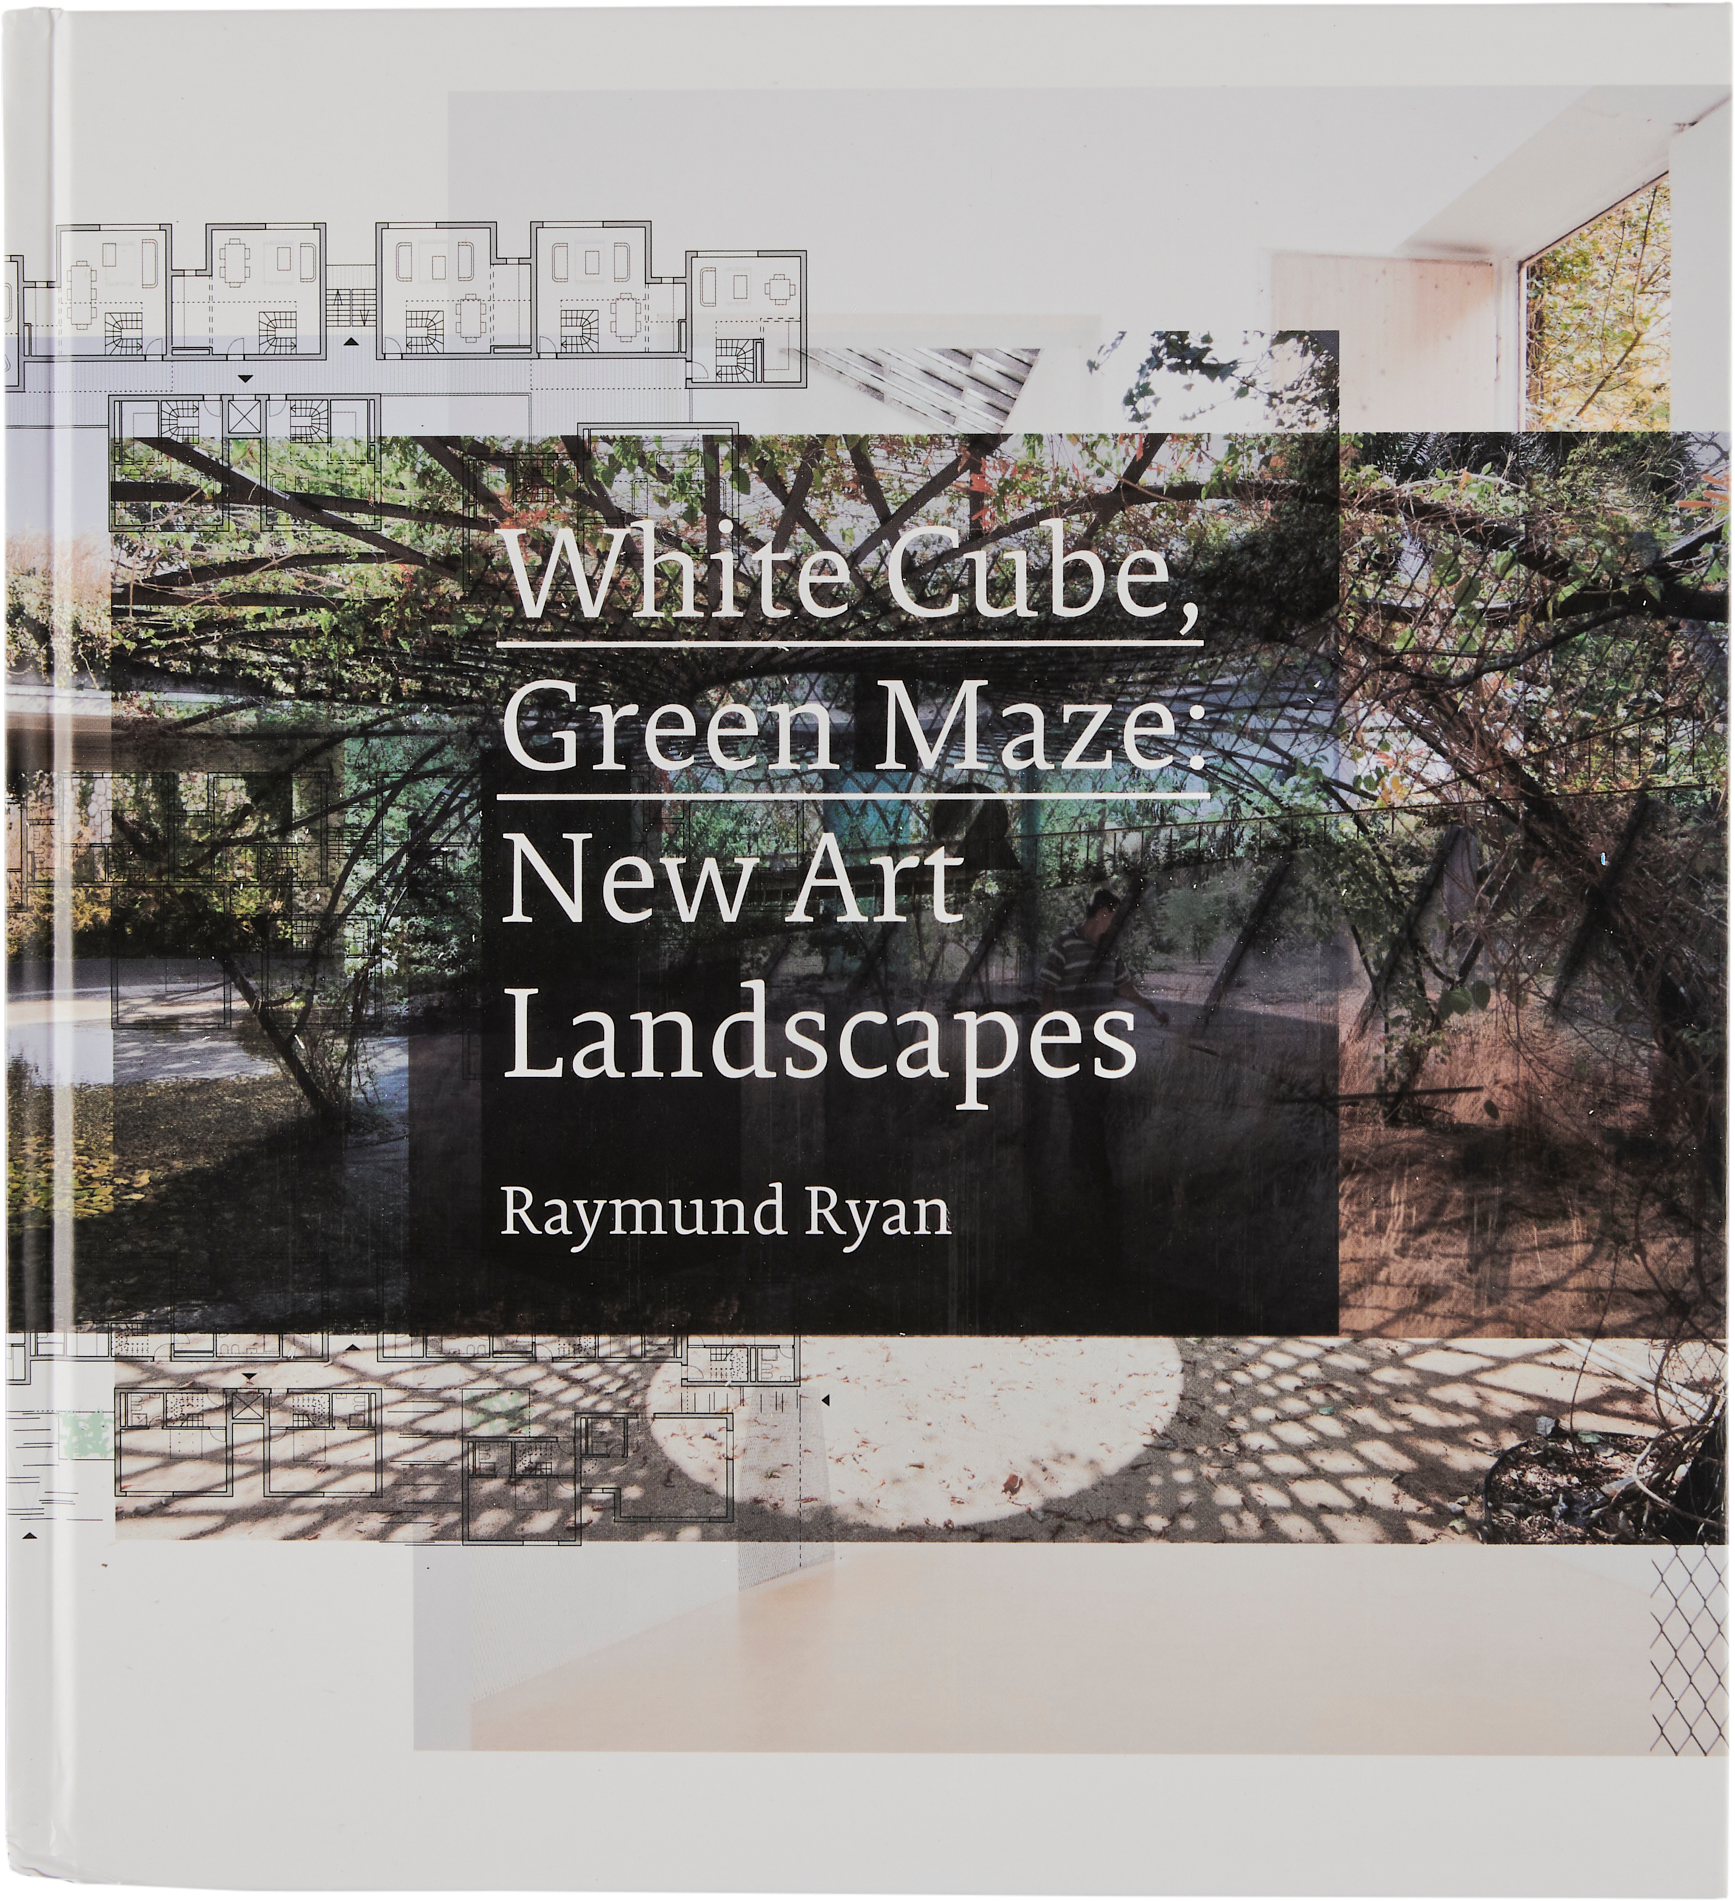 Book cover titled White Cube, Green Maze: New Art Landscapes by Raymund Ryan